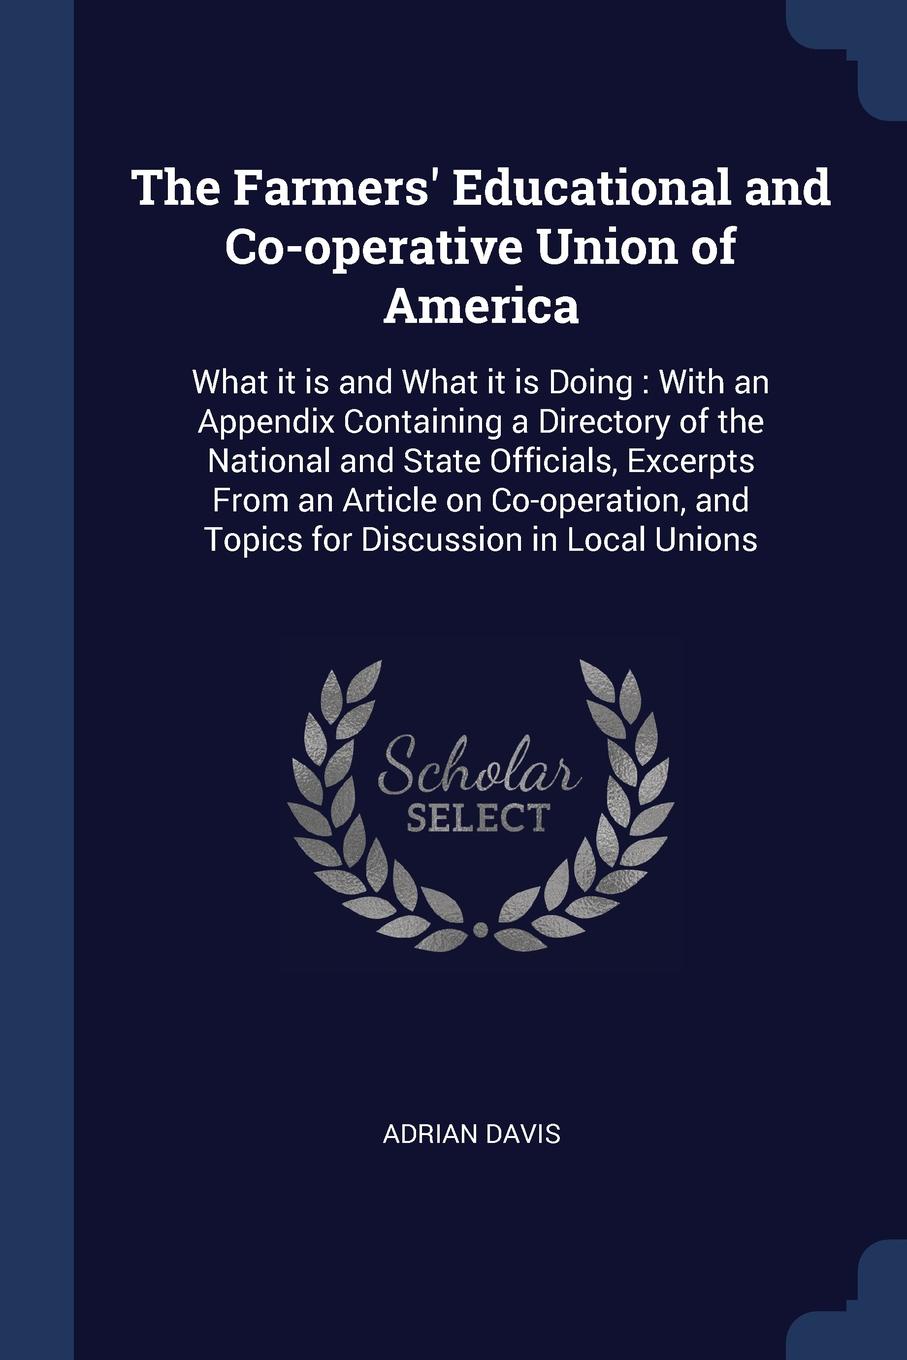 The Farmers` Educational and Co-operative Union of America. What it is and What it is Doing : With an Appendix Containing a Directory of the National and State Officials, Excerpts From an Article on Co-operation, and Topics for Discussion in Local...